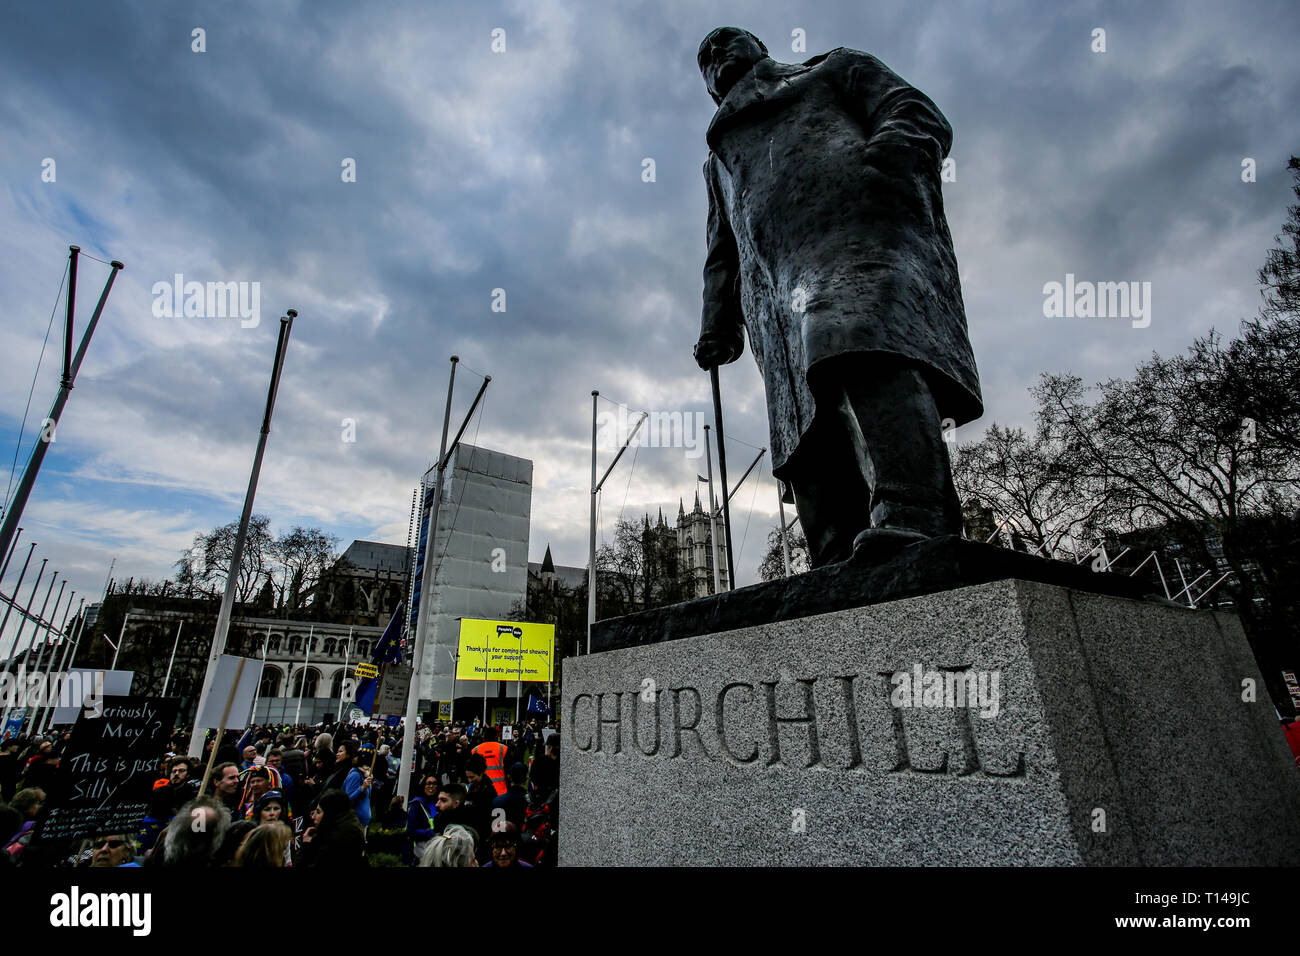 The statue or Winston Churchill overlooks a large crowd on parliament square,The People's Vote March, London, March 2019 Stock Photo